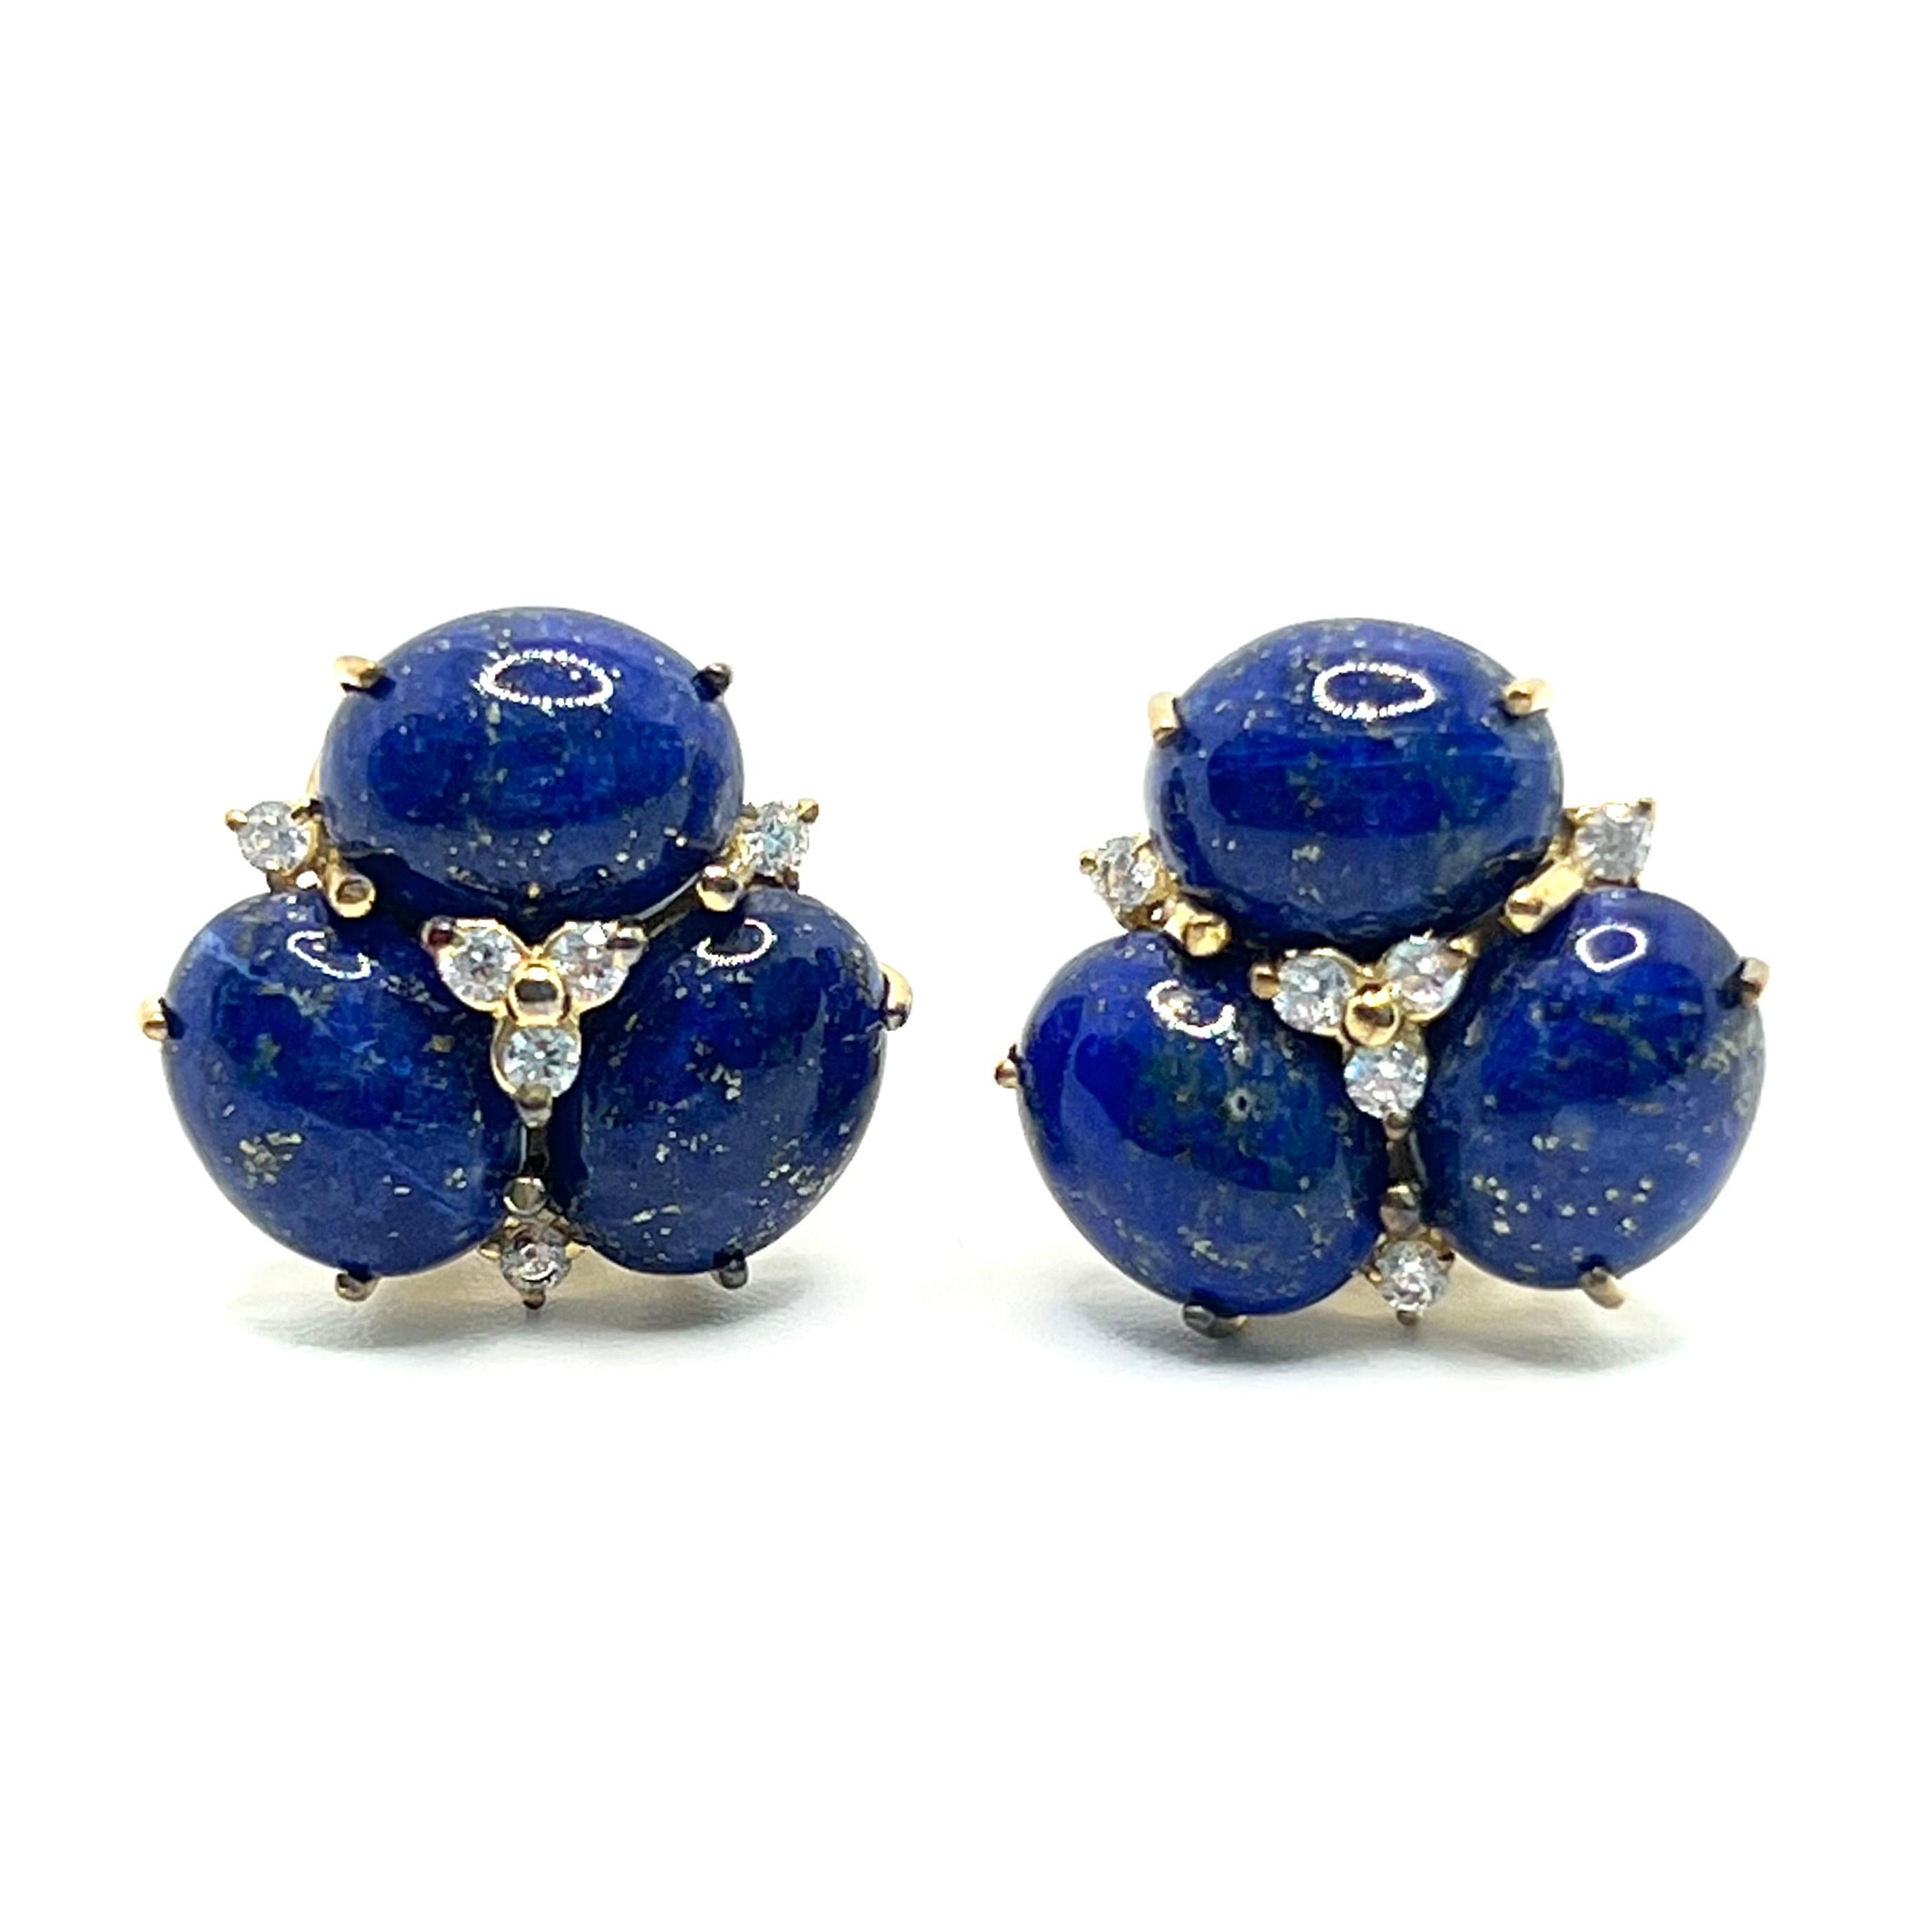 These stunning pair of earrings feature sets of oval cabochon-cut Lapis Lazuli adorned with round simulated diamond, handset in 18k yellow gold vermeil over sterling silver. The oval lapis lazuli stones have rich royal blue hue and produce beautiful